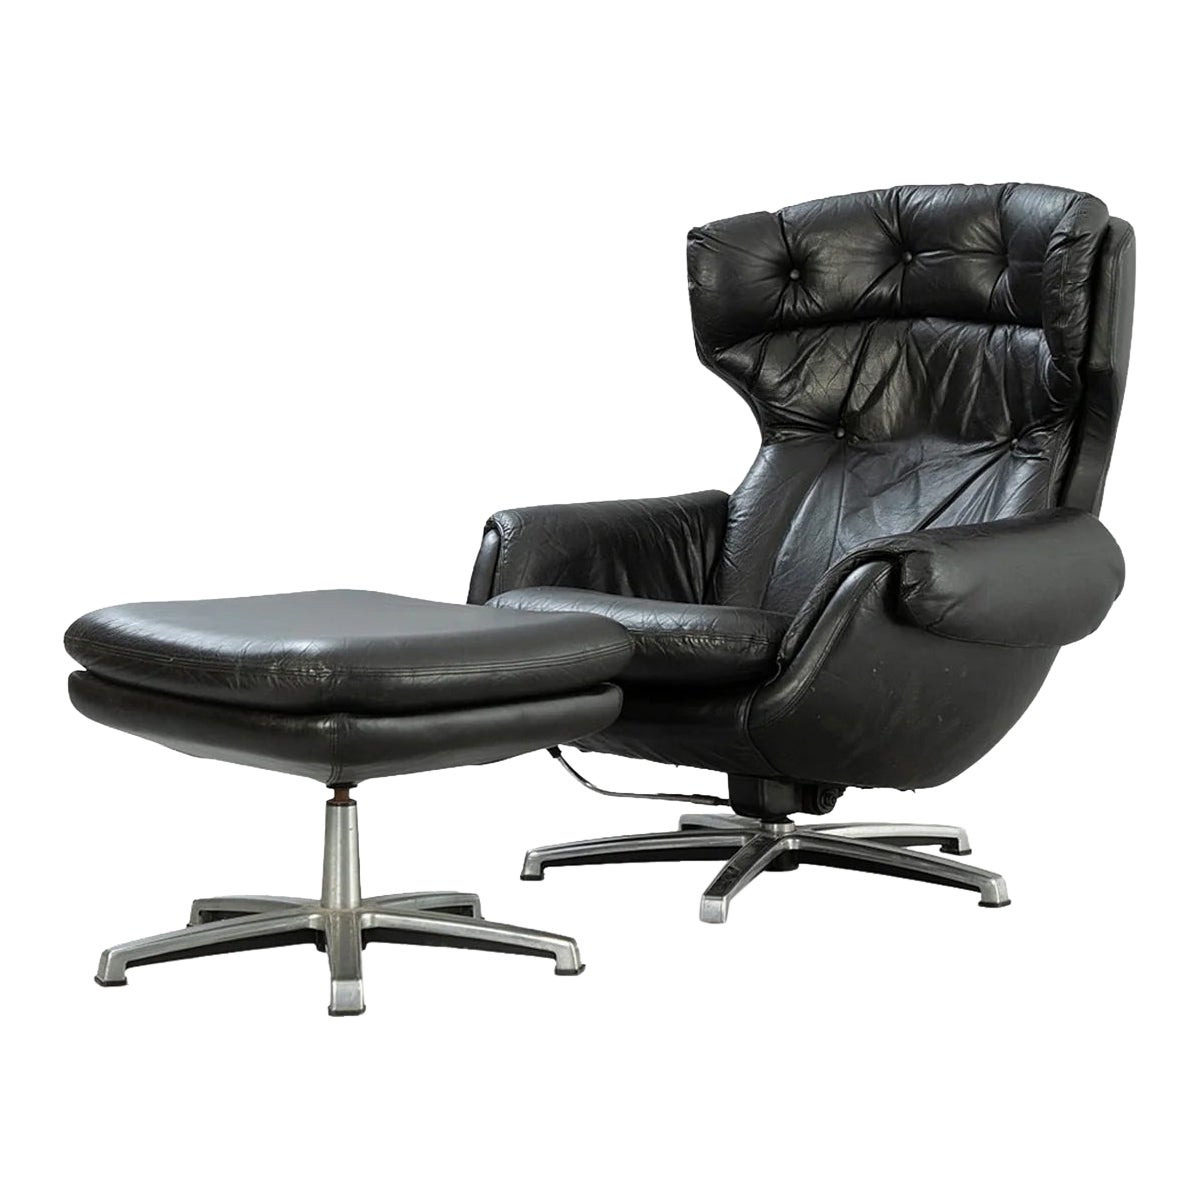 Reclining finnish lounge chair + ottoman in black leather For Sale